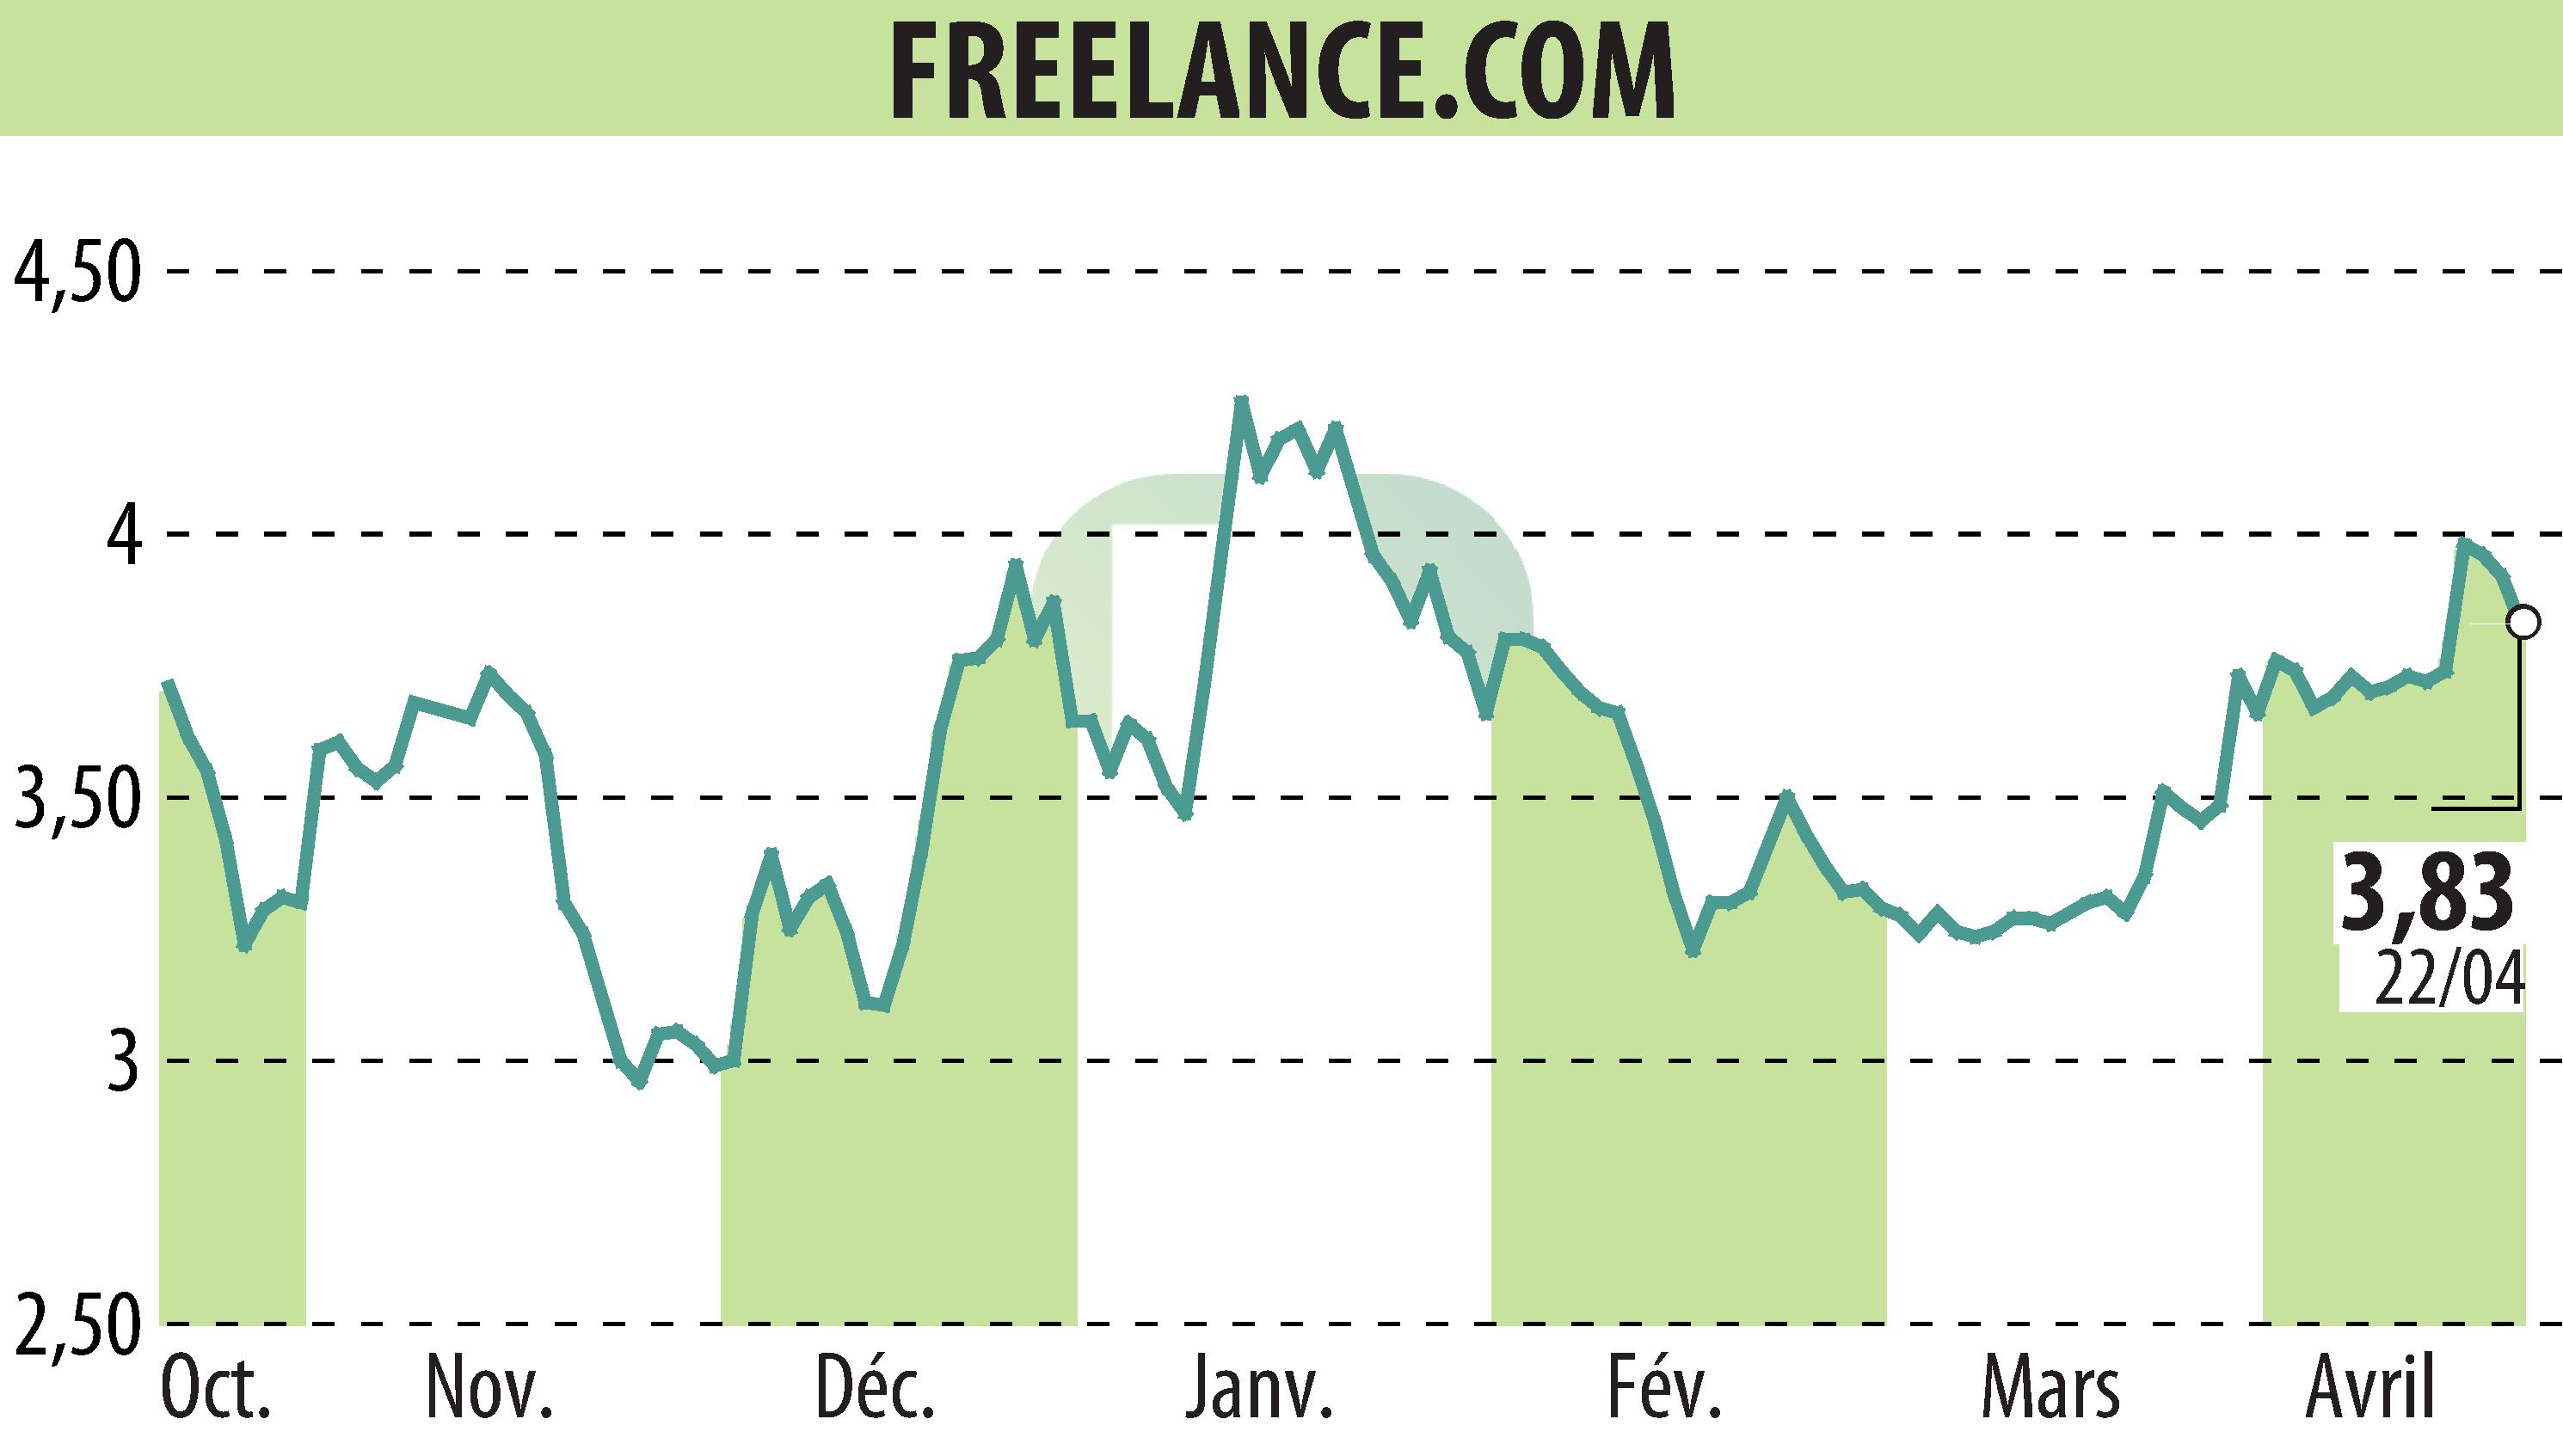 Stock price chart of FREELANCE.COM (EPA:ALFRE) showing fluctuations.